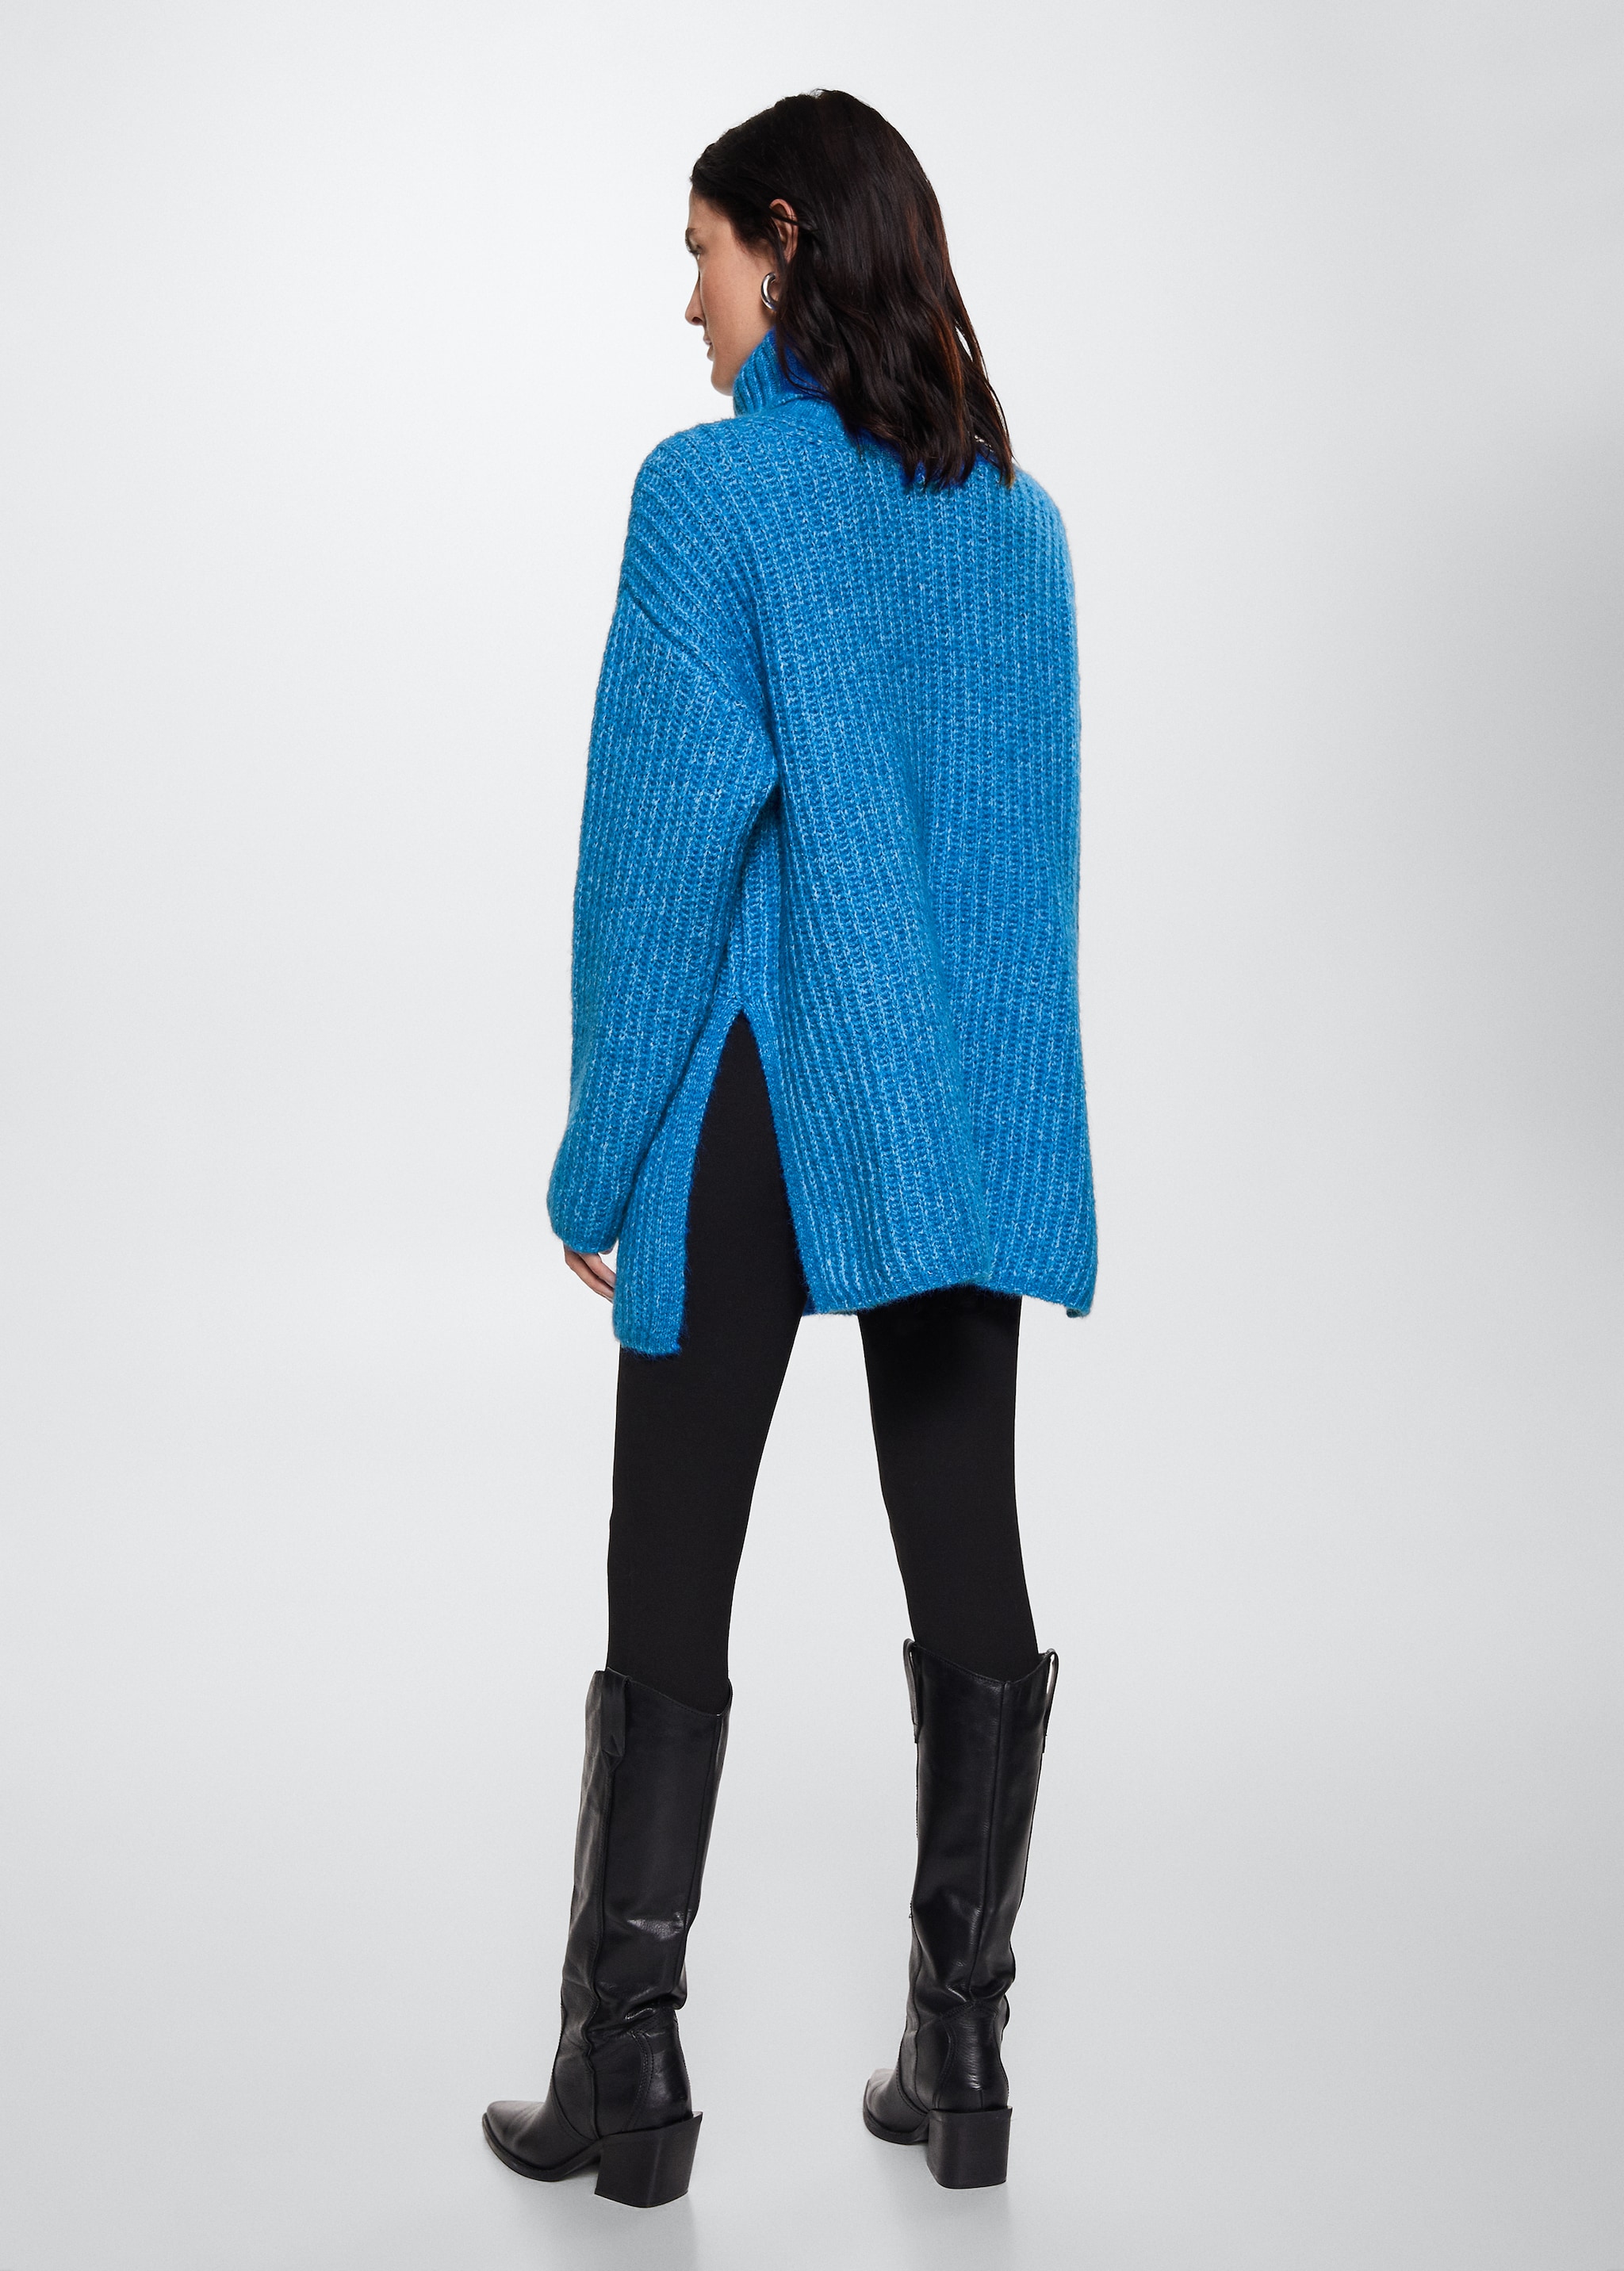 Oversized perkins neck sweater - Reverse of the article